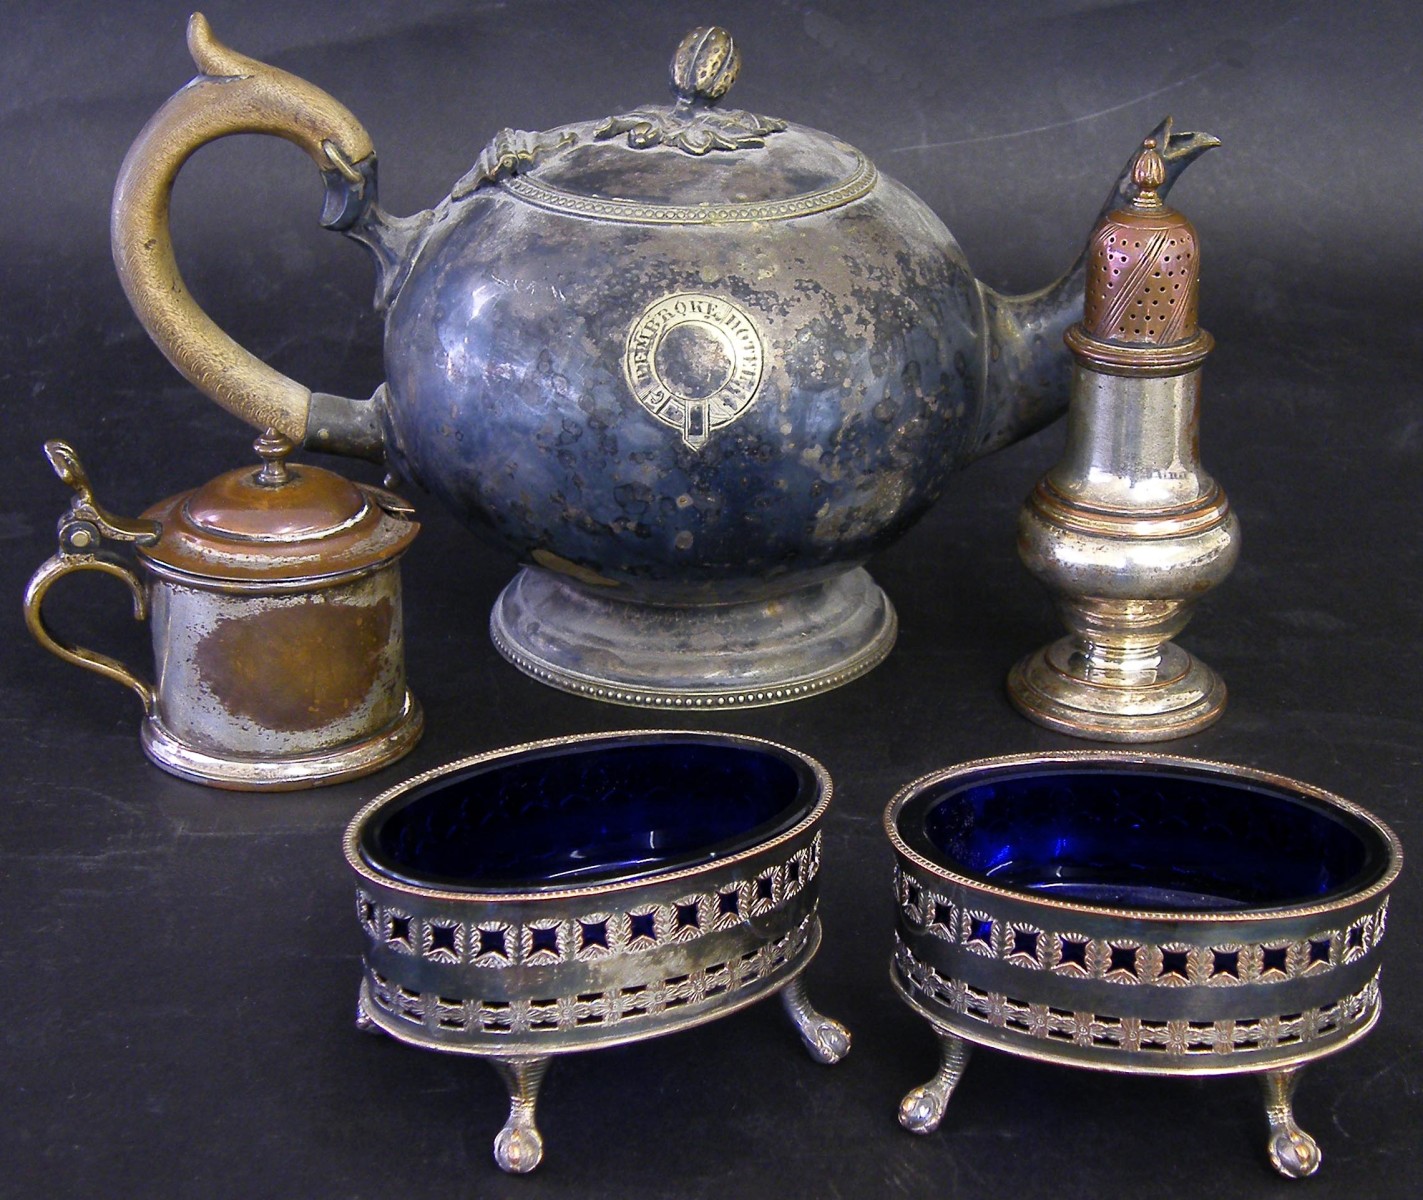 Pair of Sheffield plate table salts with blue glass liners and claw and ball feet, 3.5" wide;